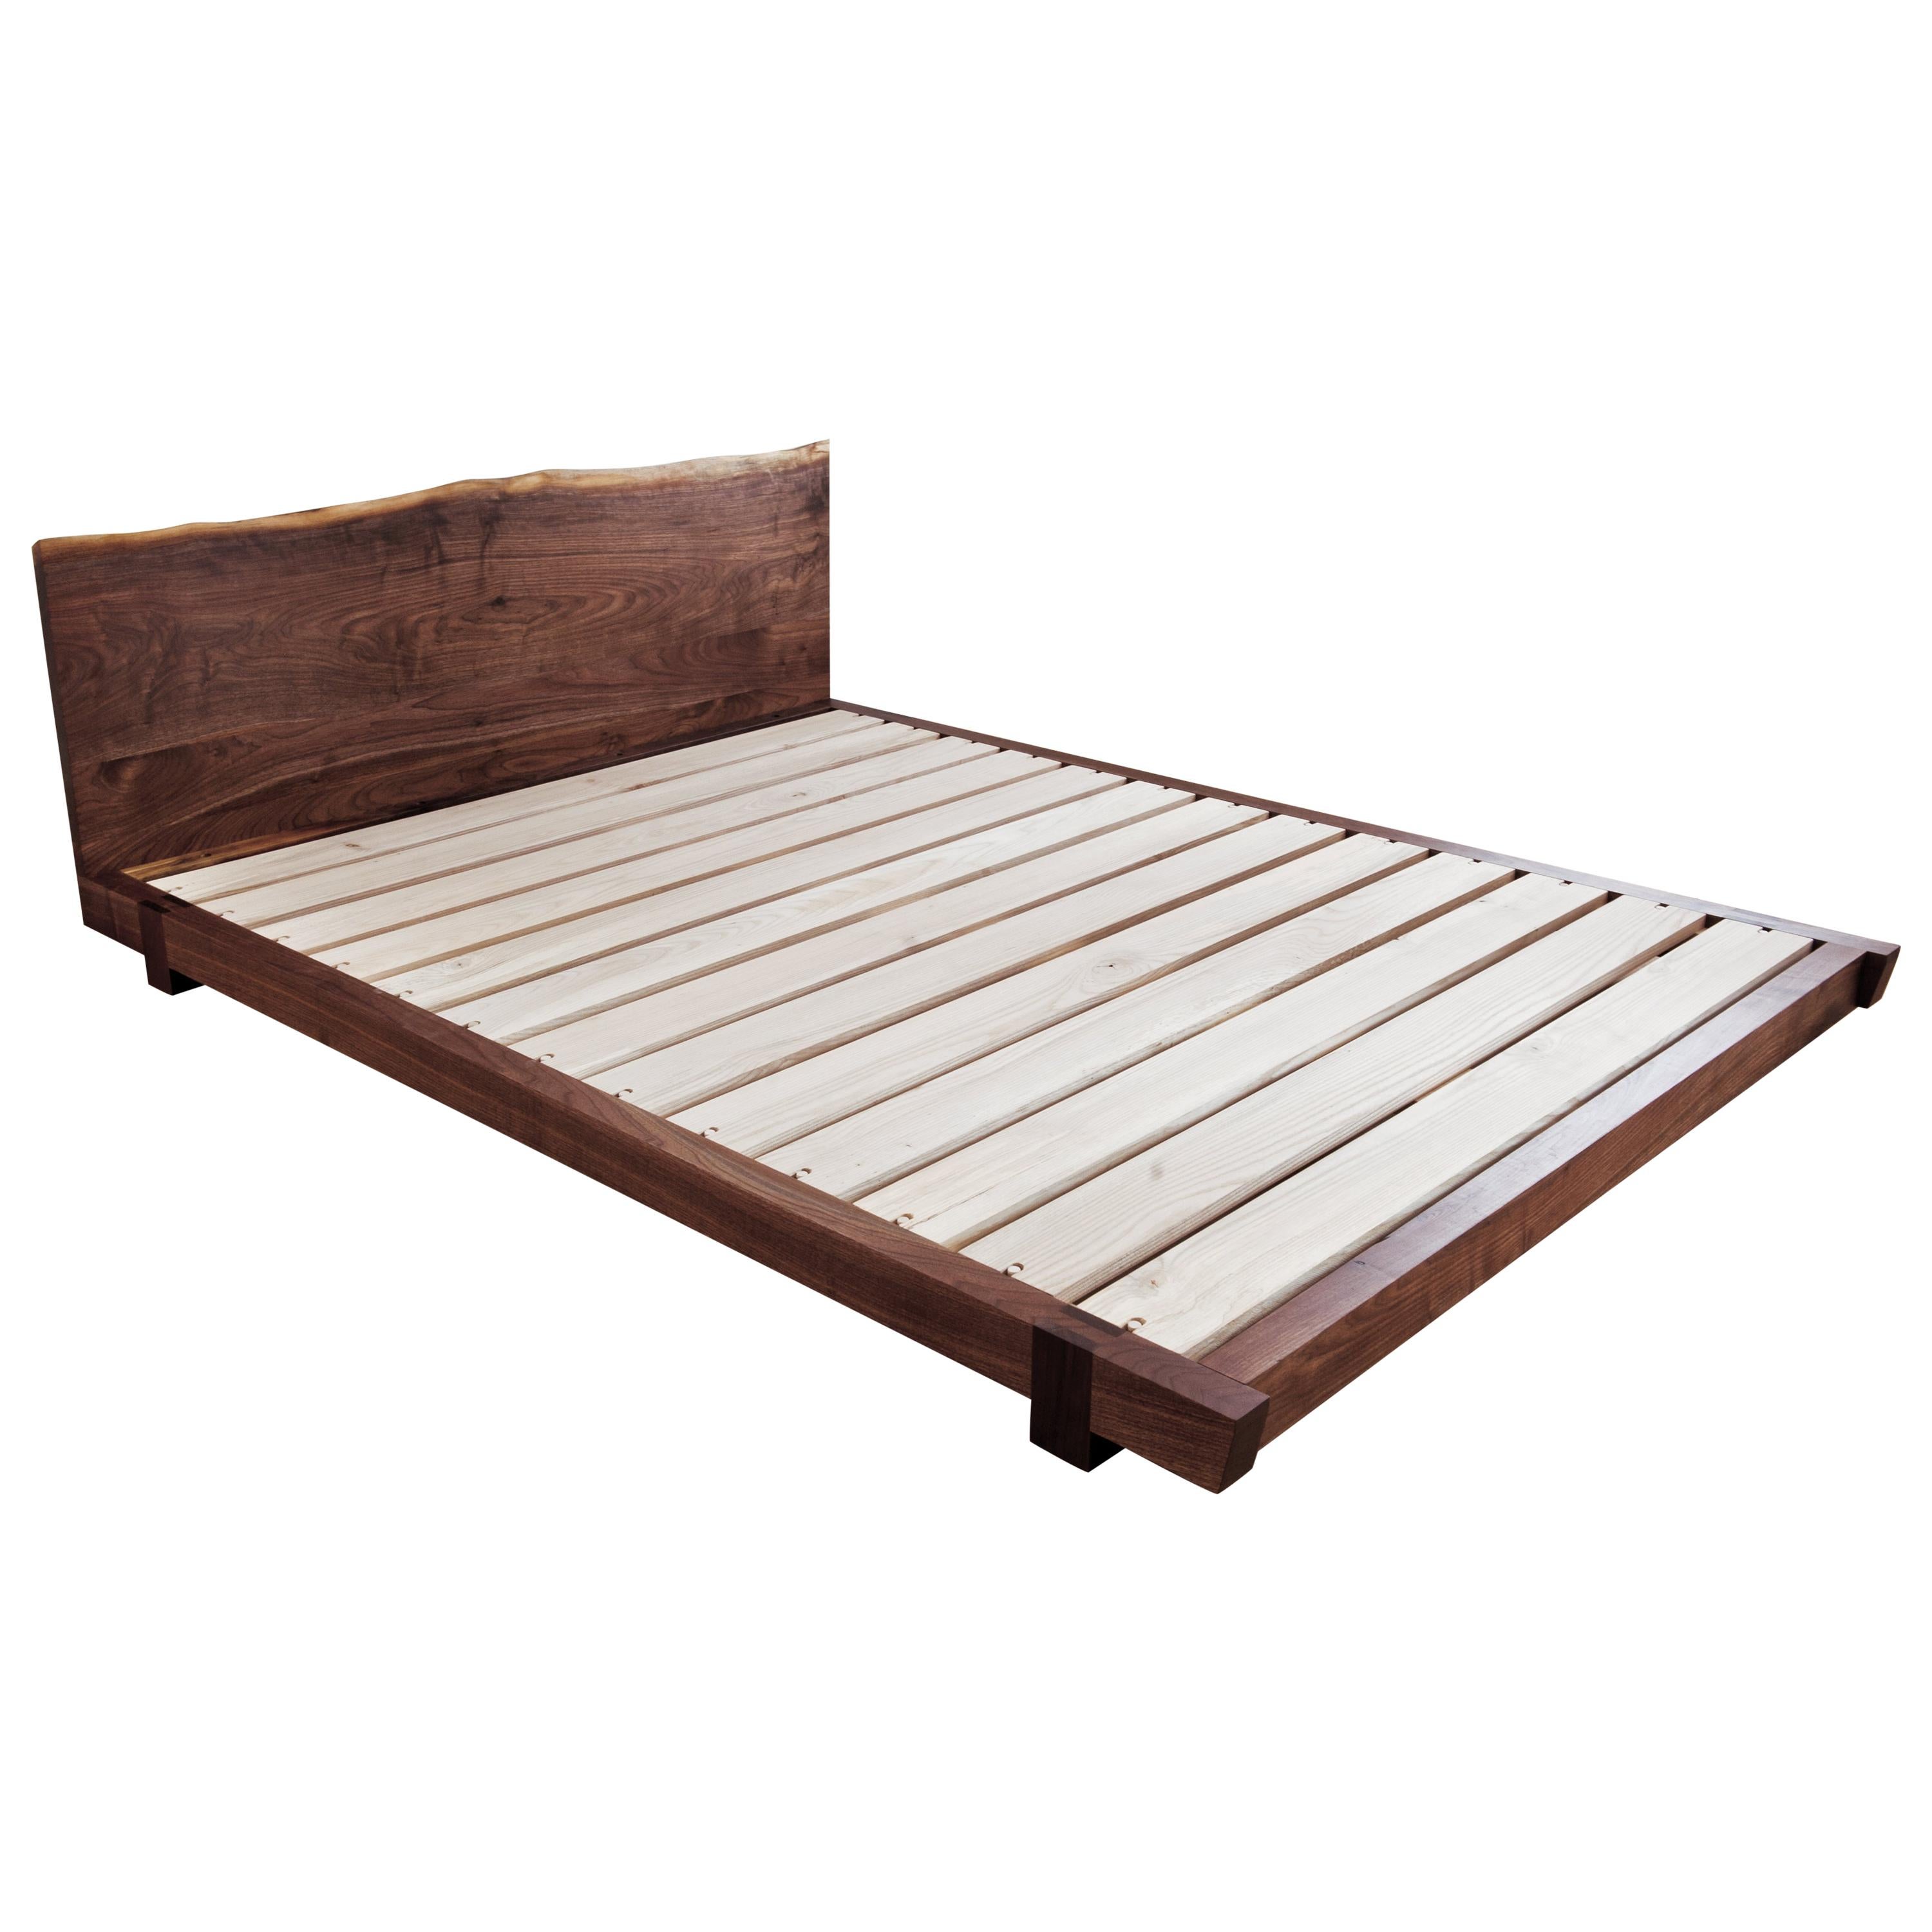 Black Walnut Perri Bed Queen-sized with Sustainable Live-edge Slab Headboard